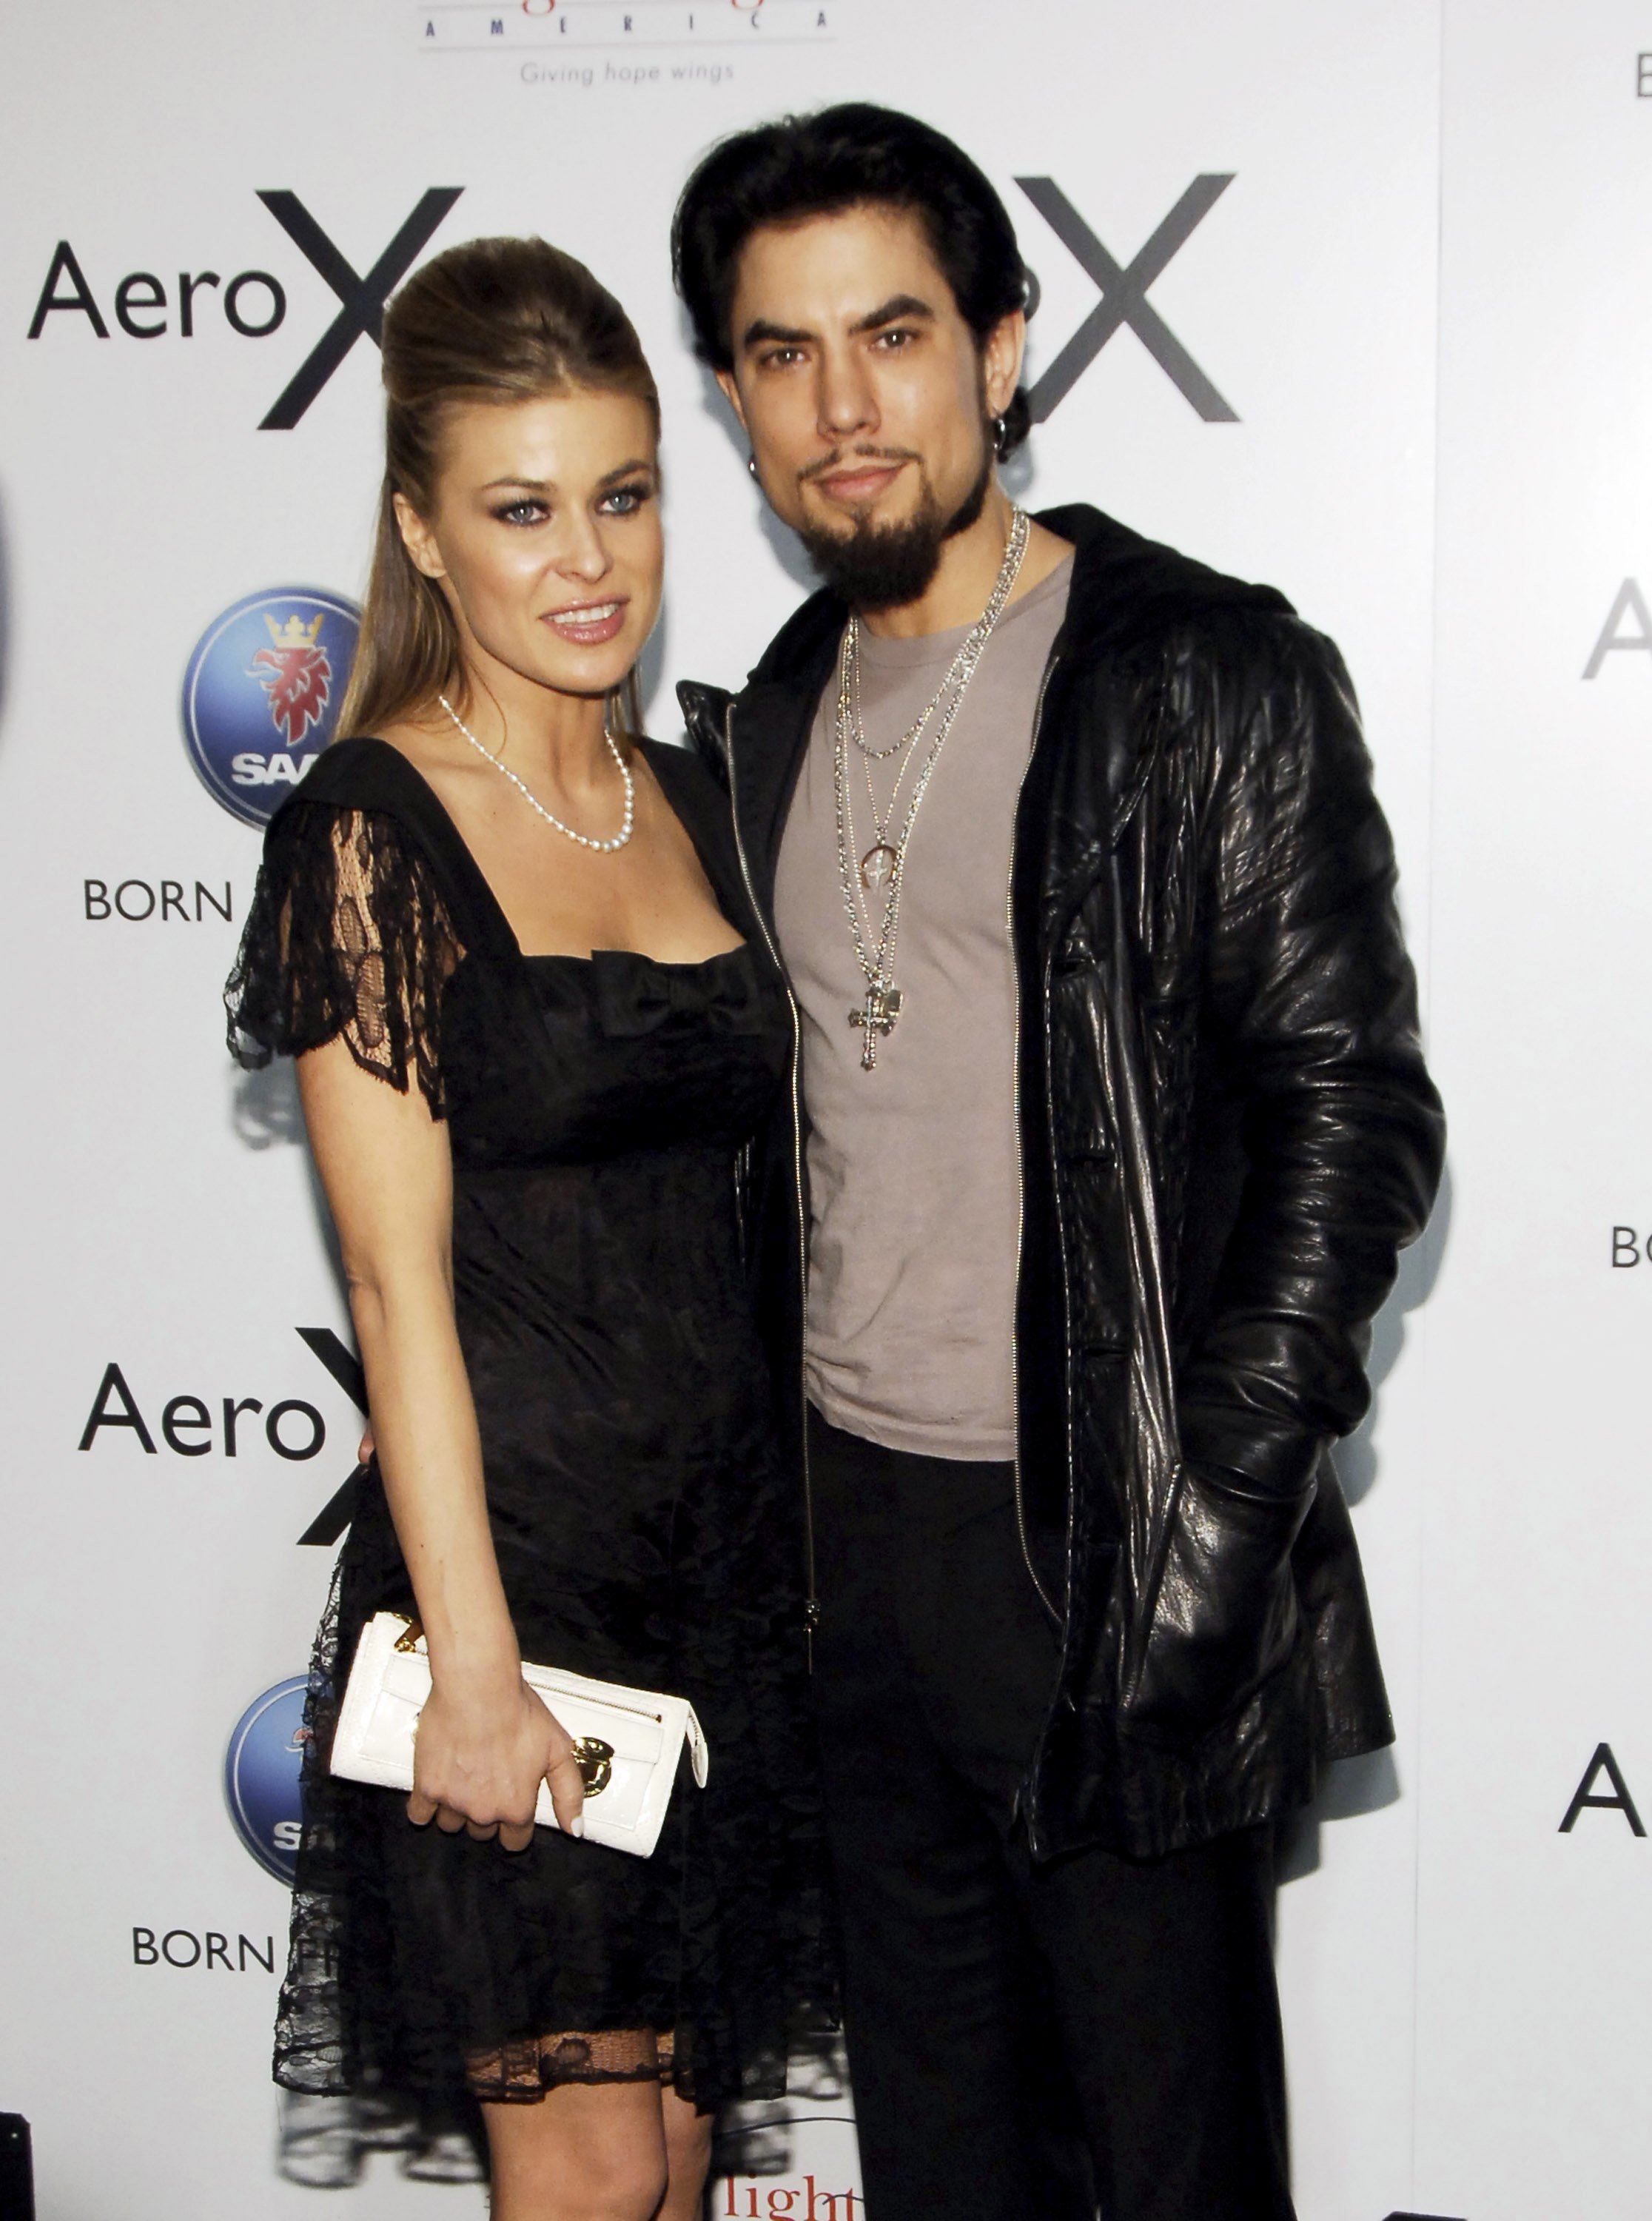 Carmen Electra and Dave Navarro  at The Altman Building in New York City, New York on April 10, 2006  | Source: Getty Images